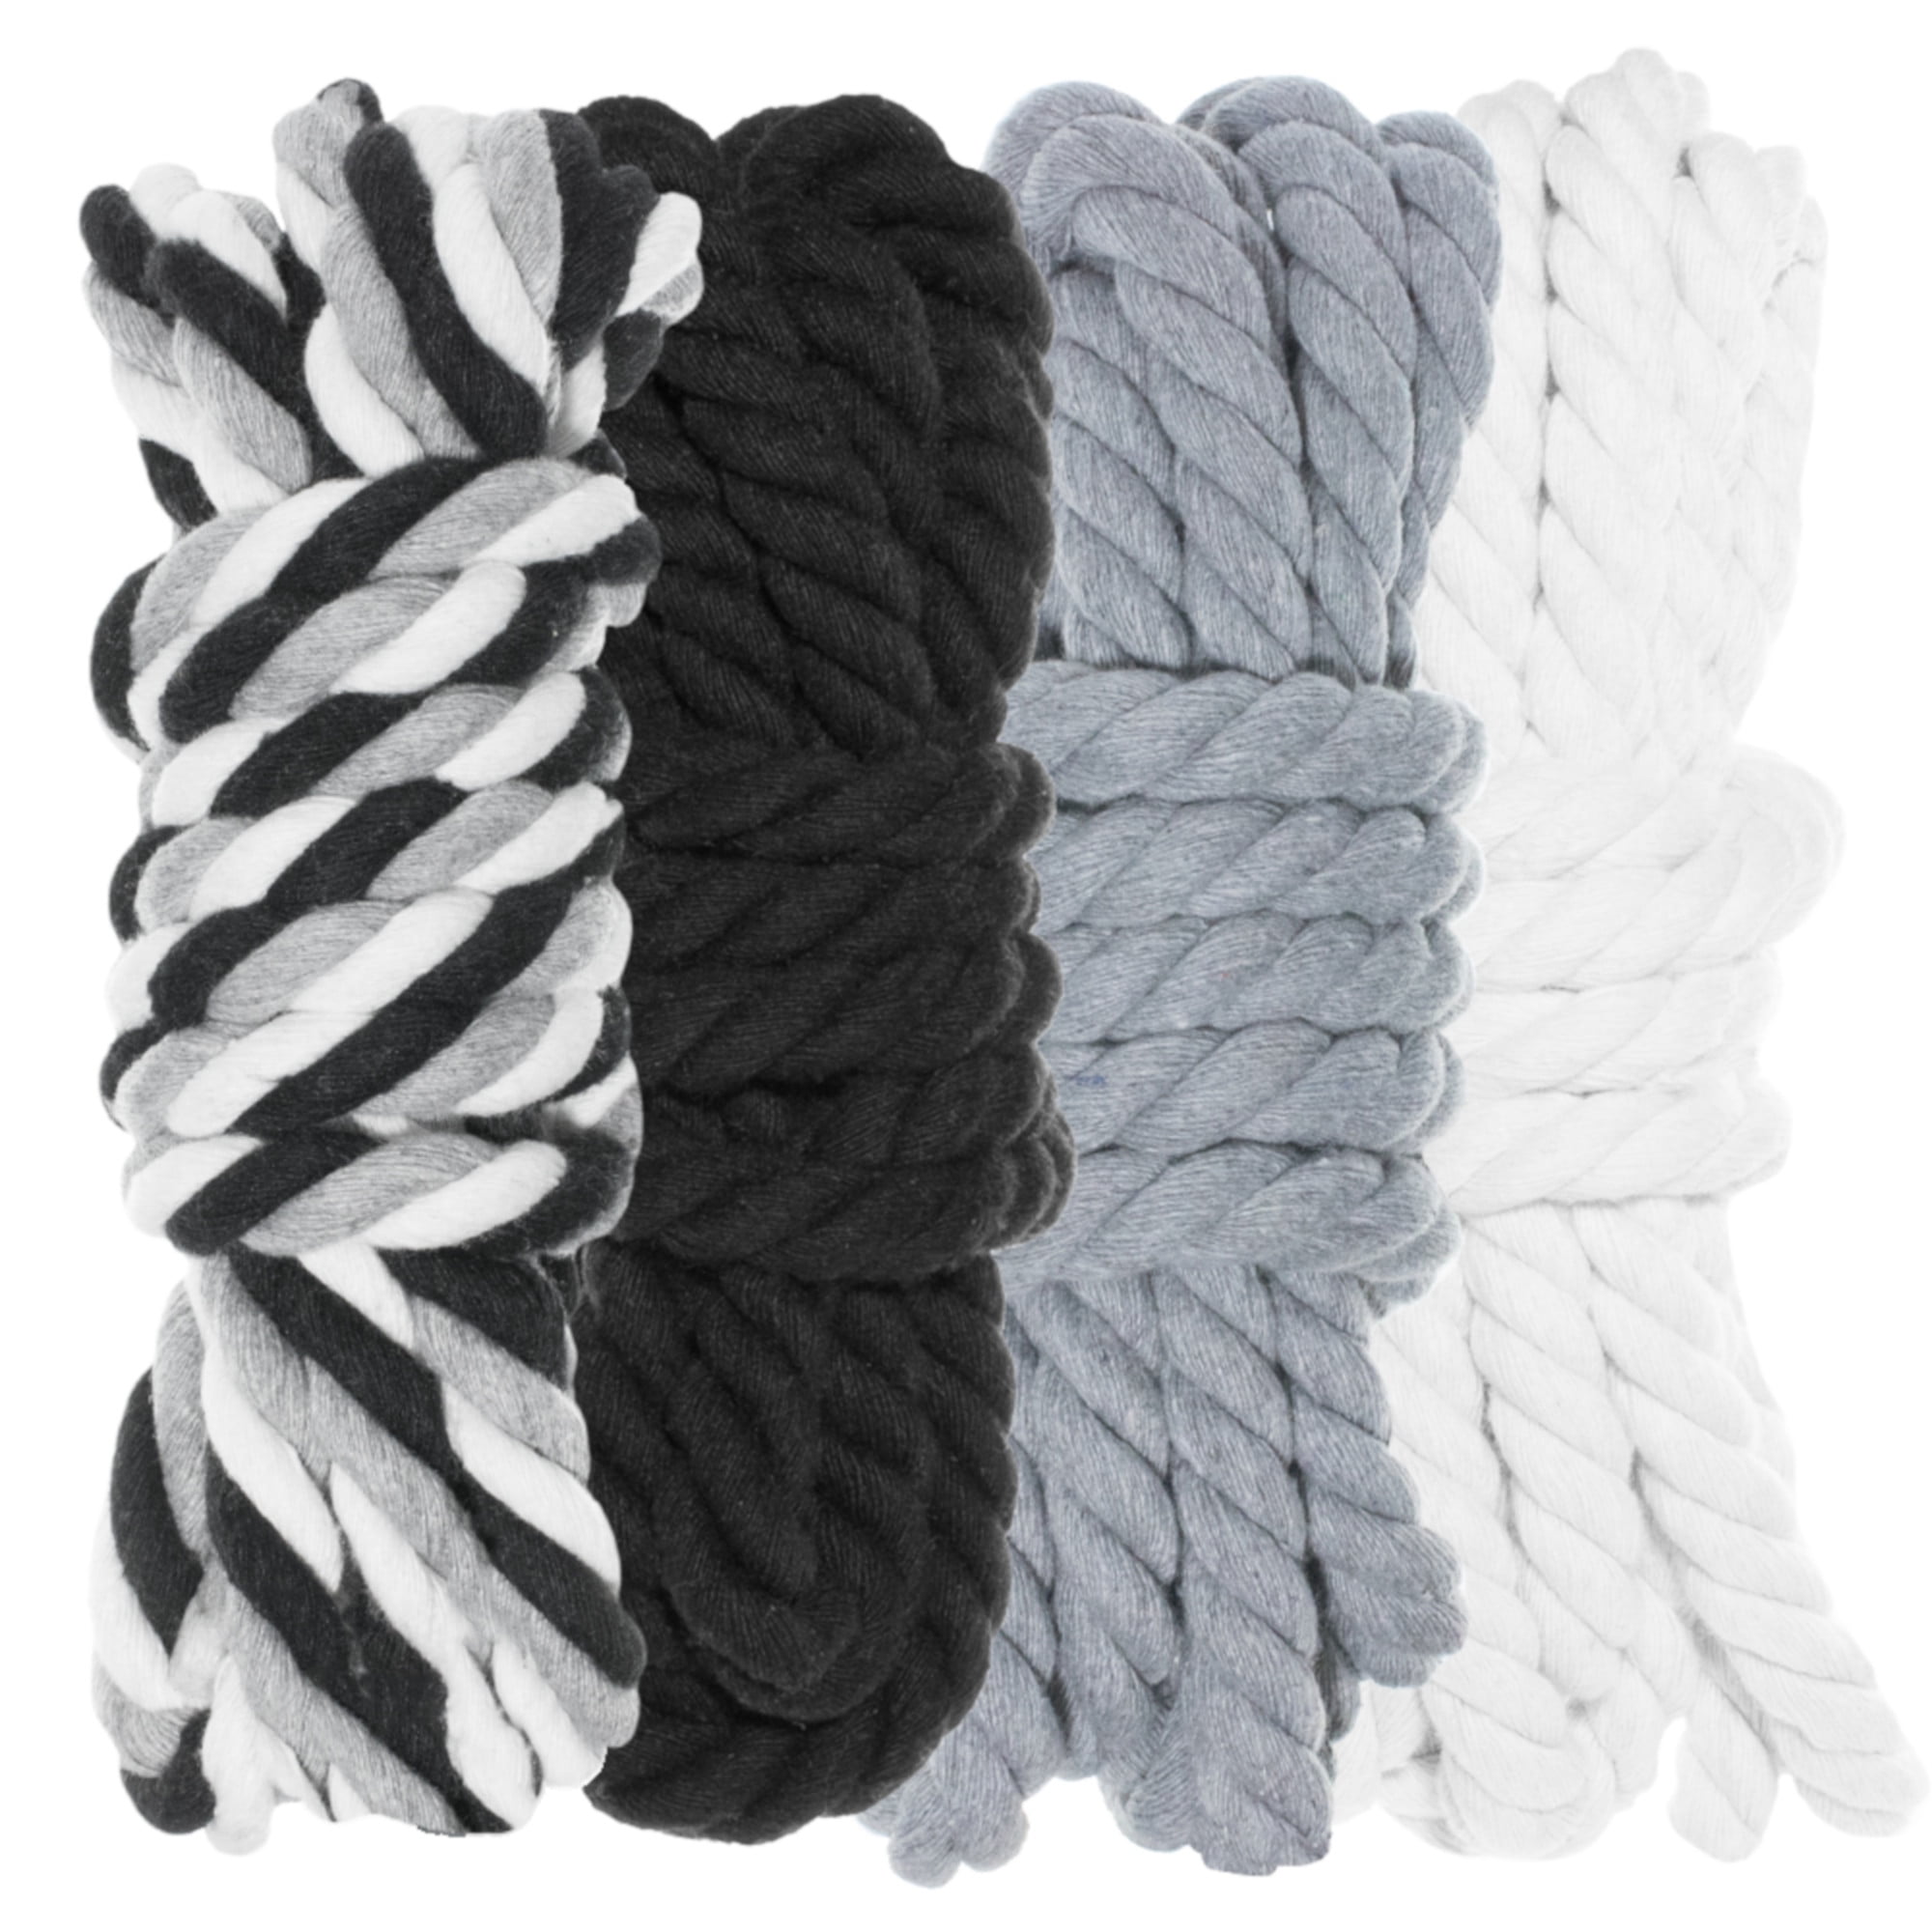 Twisted 3 Strand Natural Cotton Rope 40 and 100 Foot Kits in 1/4 Inch and  1/2 Inch - Soft Knot Tying Artisan Cord Decorative Crafting - Assorted 